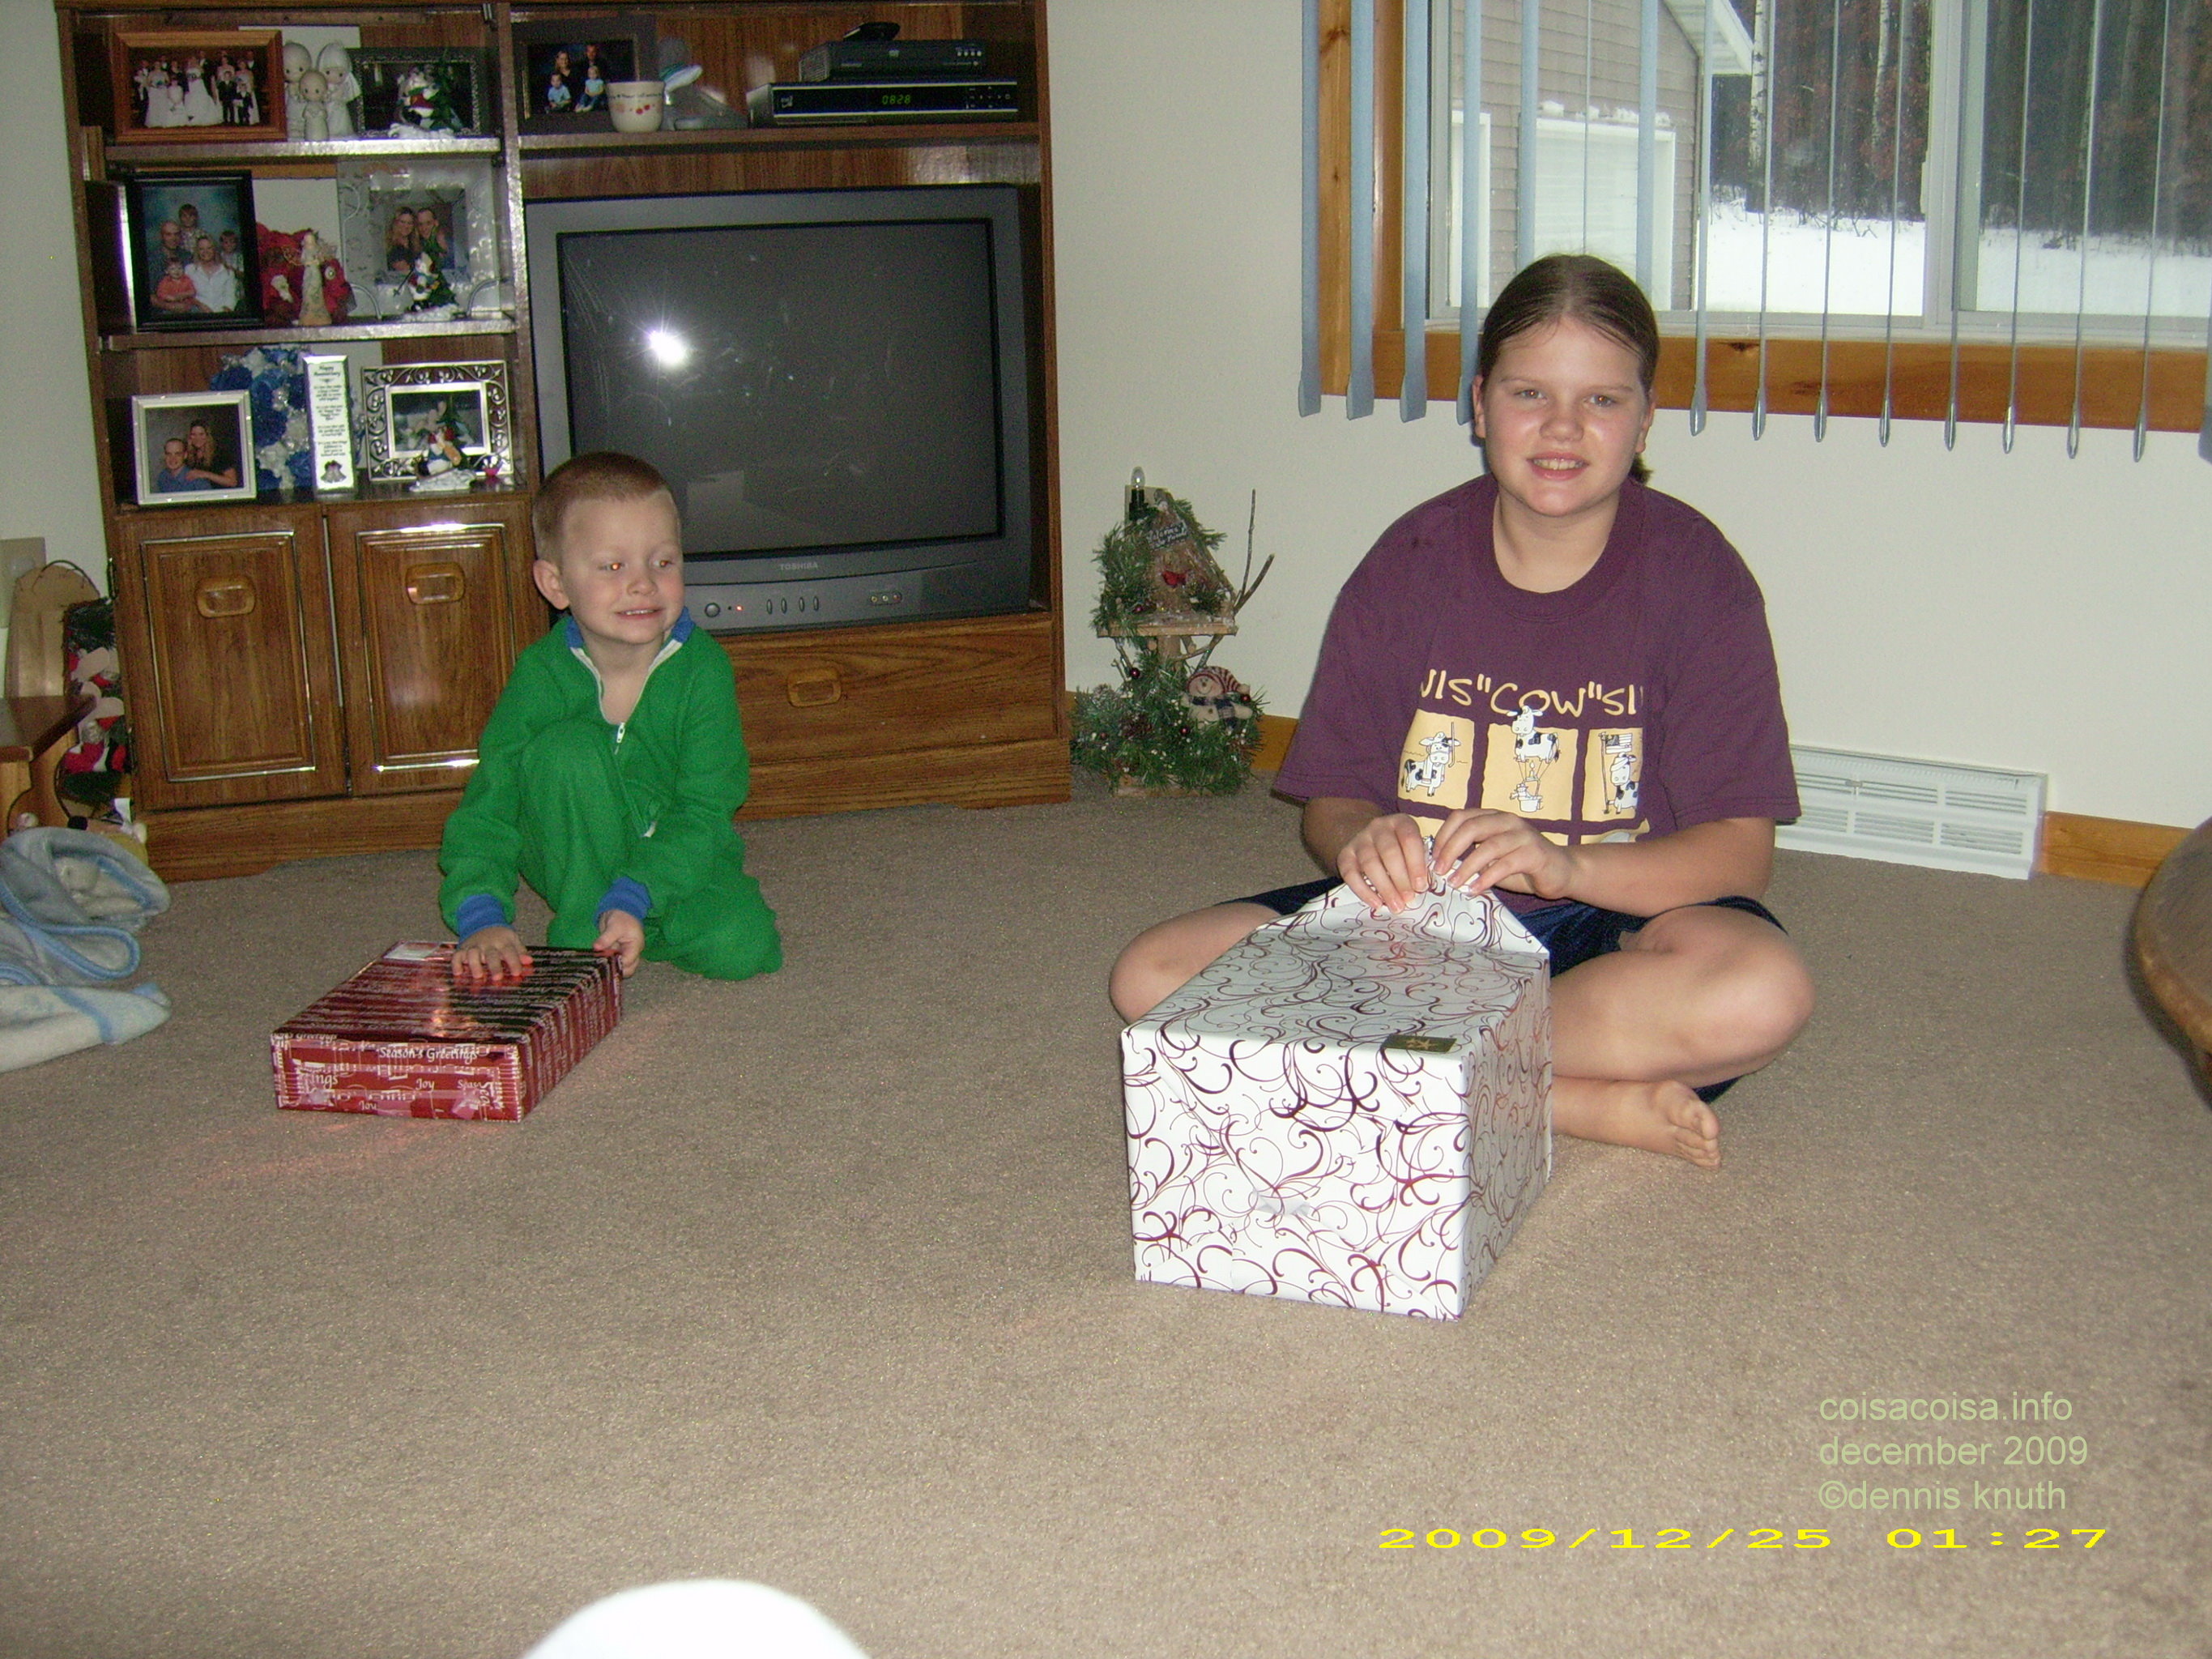 Kelsey opens the first gift and Jared watches